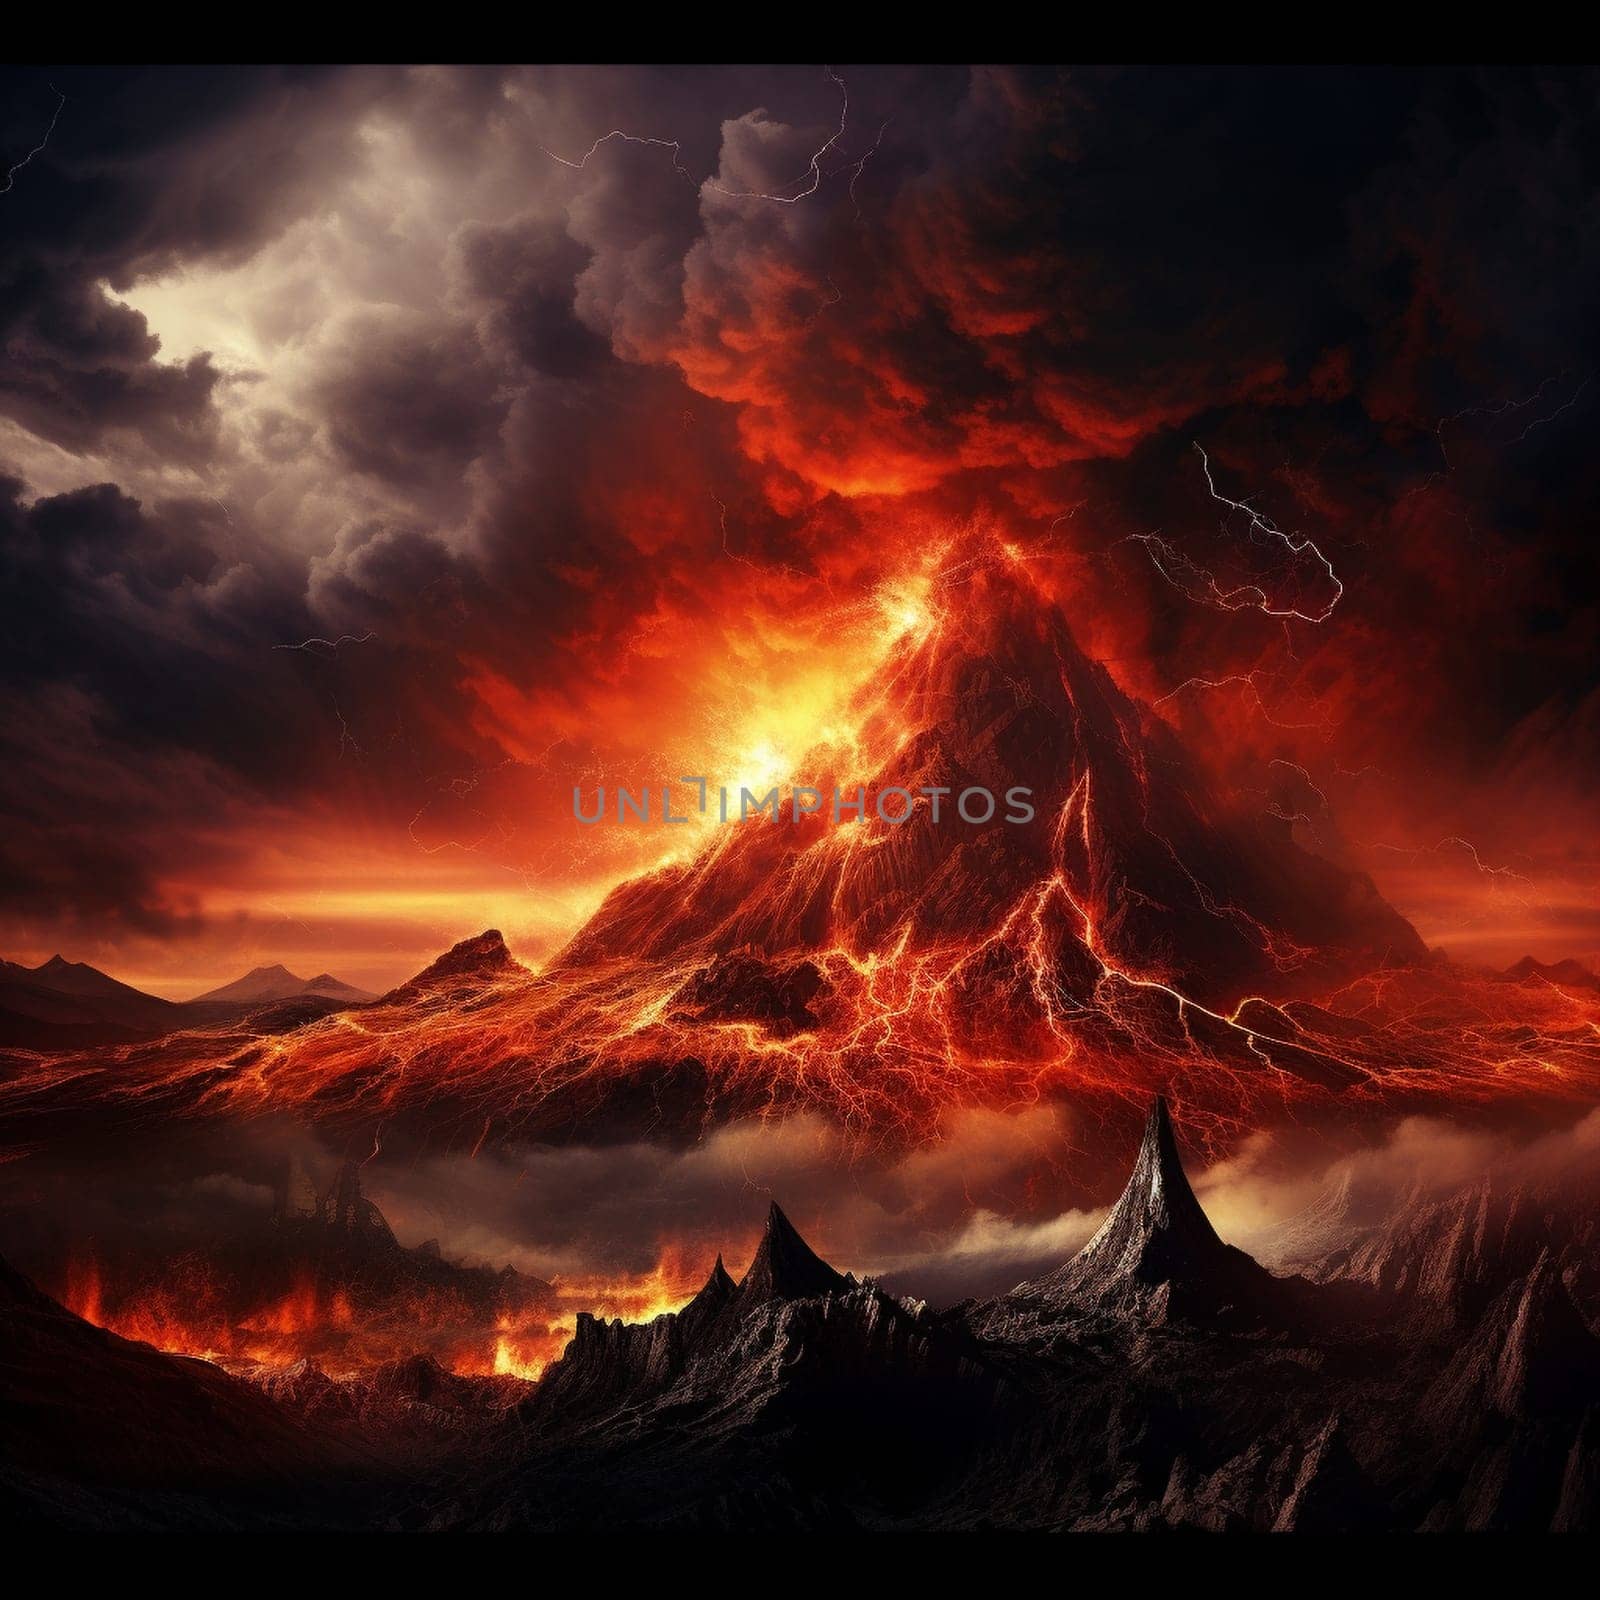 Witness the raw power and captivating beauty of volcanic eruptions in this microstock-friendly art style. The image portrays a fiery volcano erupting with enormous force, unleashing cascades of lava and billowing clouds of ash. The intense inferno and chaotic display of nature's might evoke feelings of awe and danger.